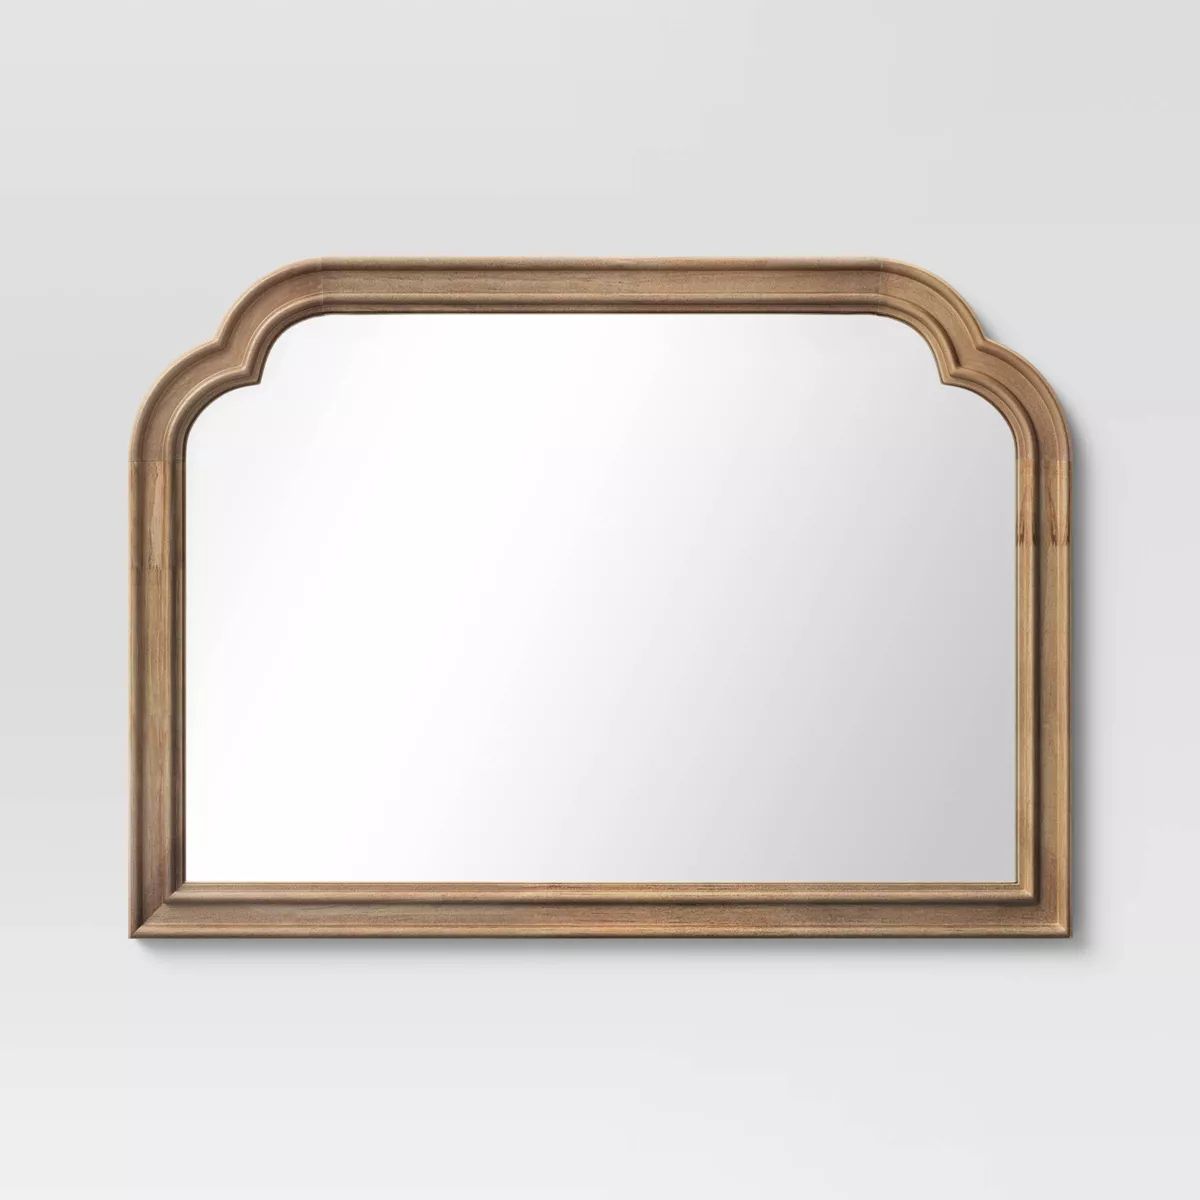 36" x 26" French Country Mantle Wood Mirror Natural - Threshold™ | Target